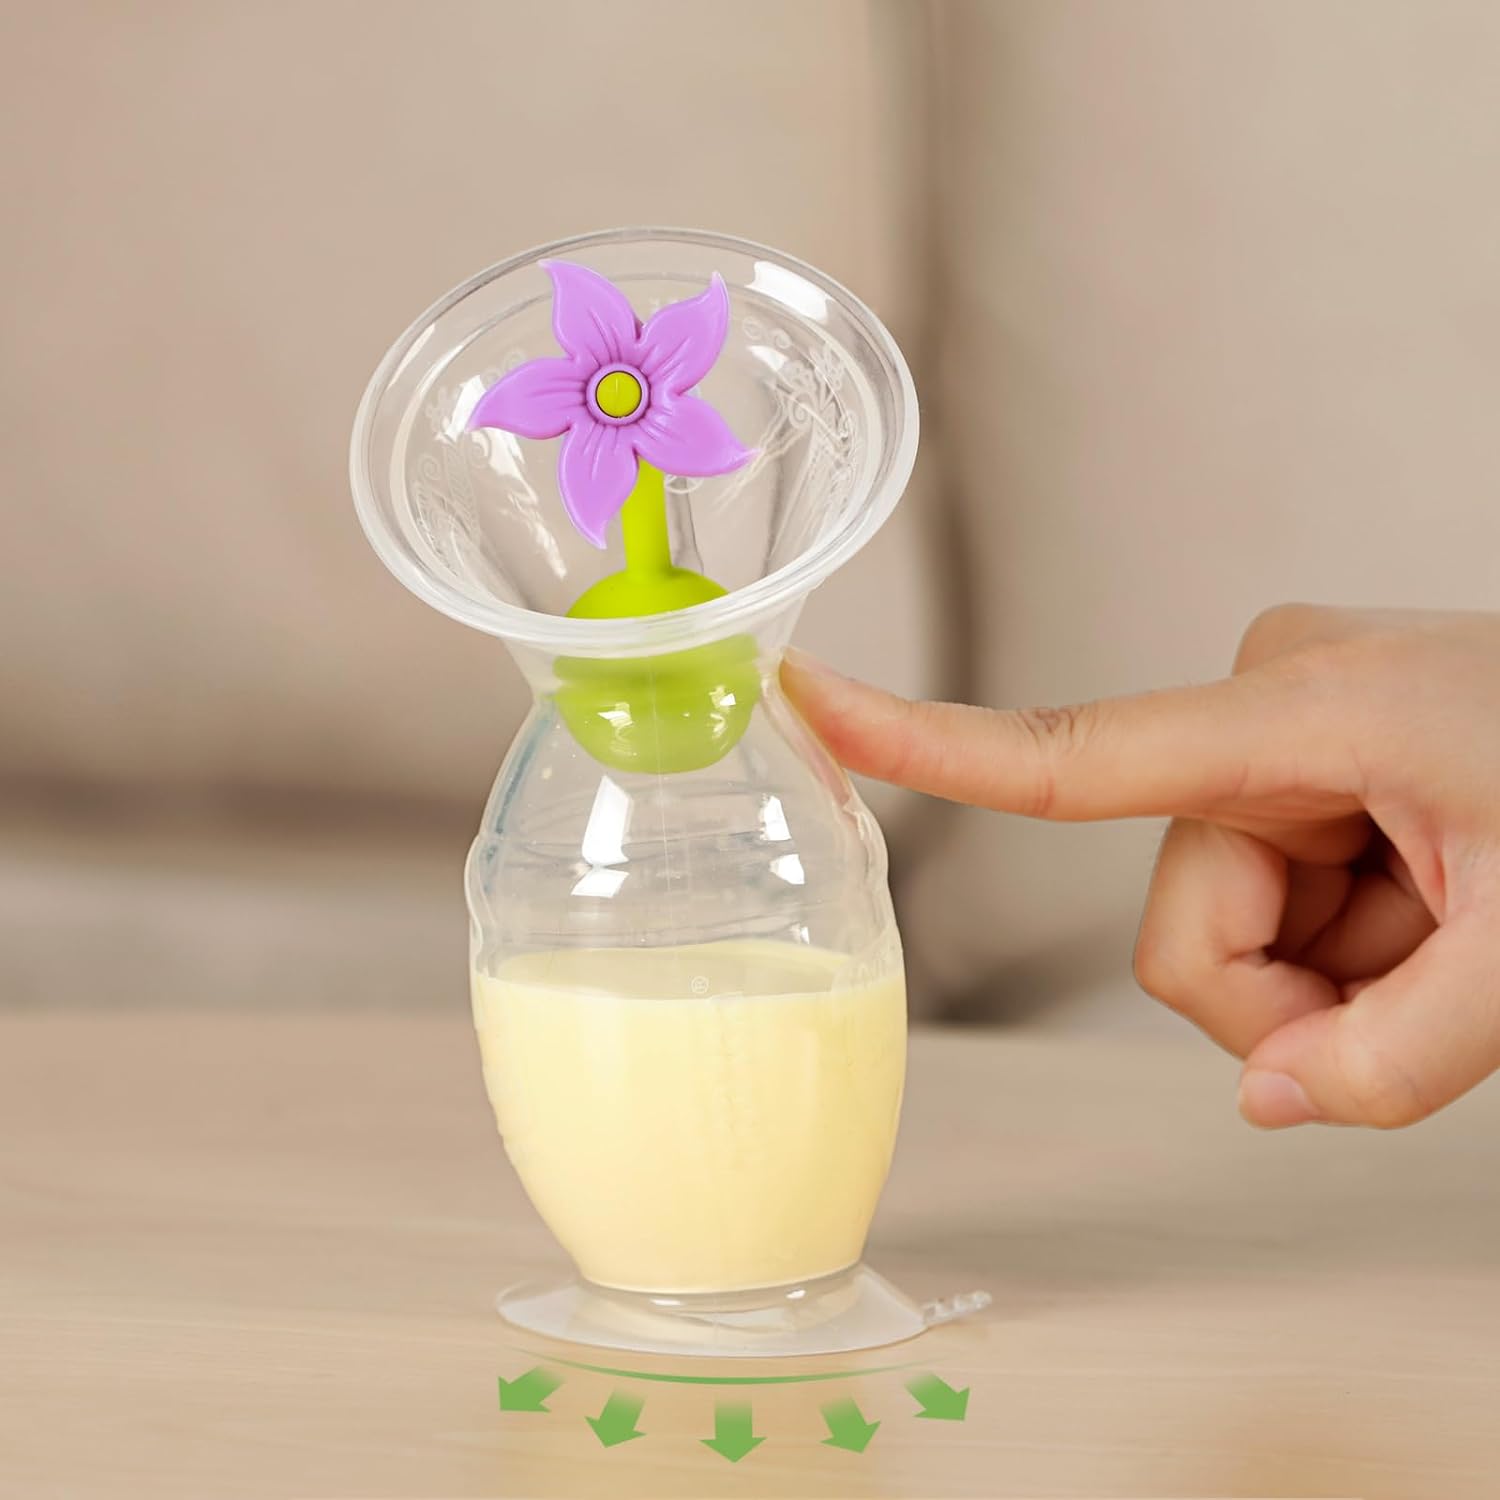 haakaa Silicone Breastpump Manual Breast Pump Milk Saver Milk Pump with Suction Base and Flower Stopper 100% Food Grade Silicone BPA Free (5oz/150ml) (Purple) : Baby